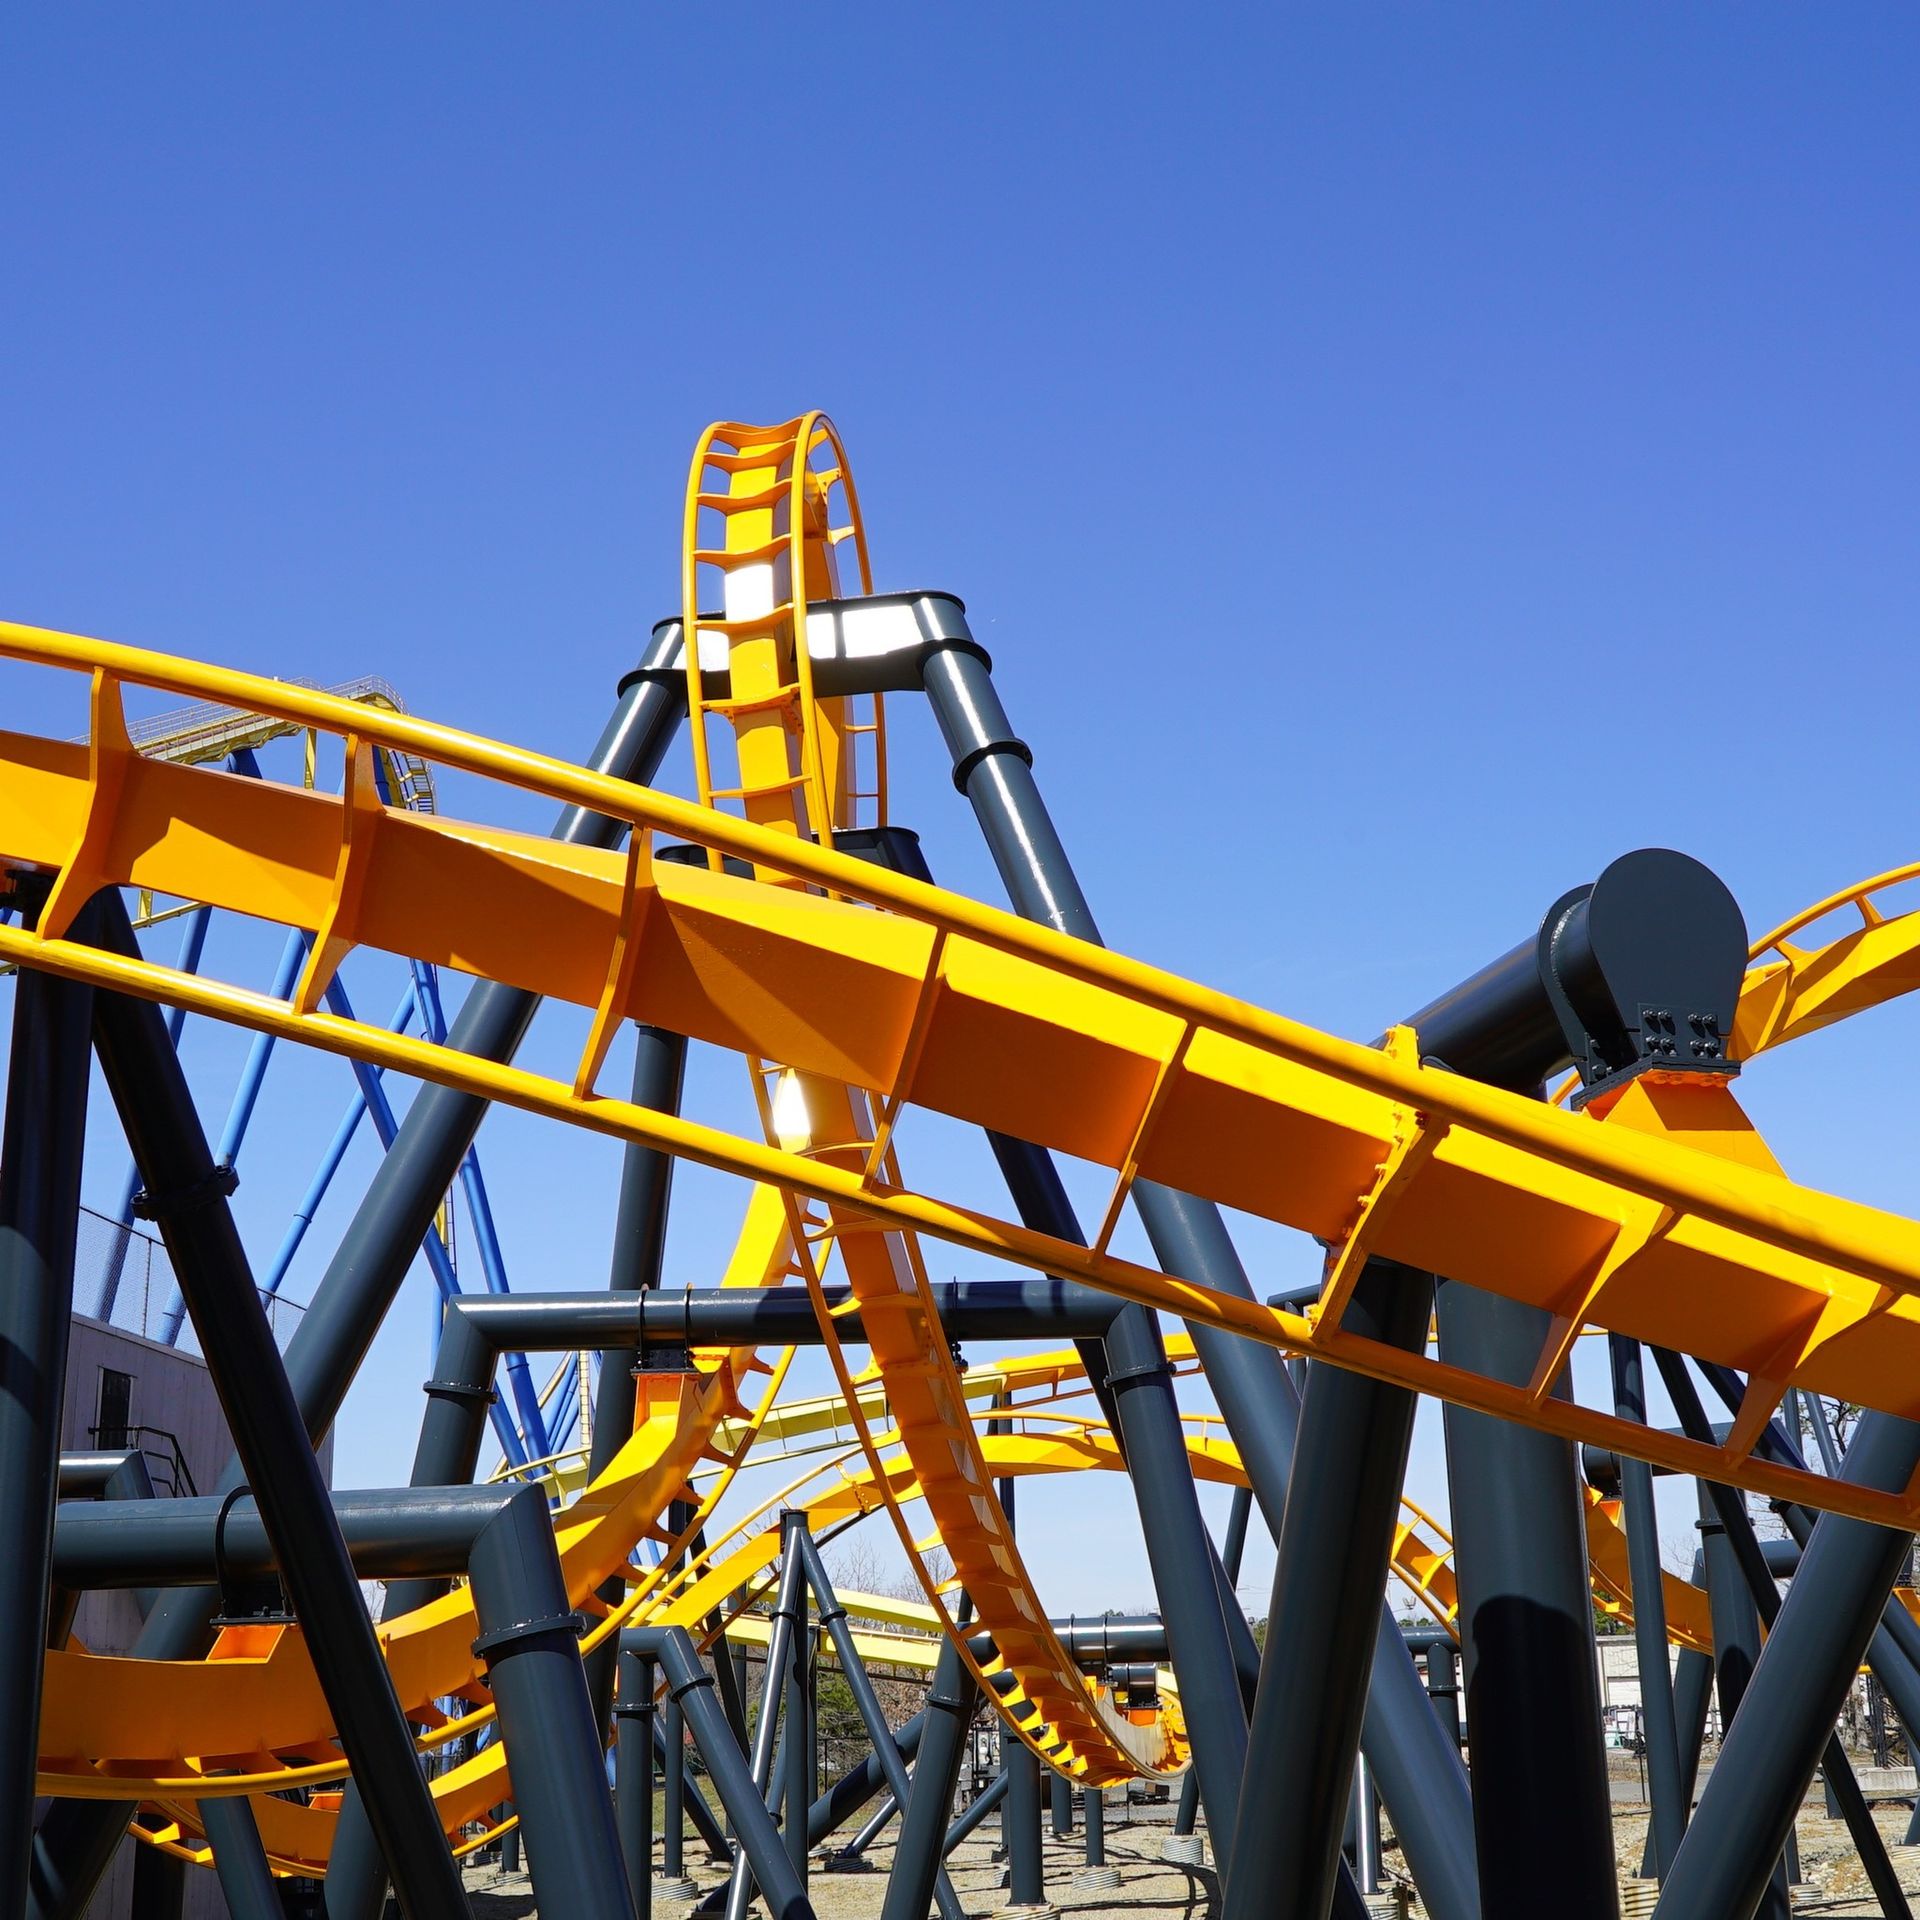 World's Tallest Roller Coaster: world record in Jackson, New Jersey, United States